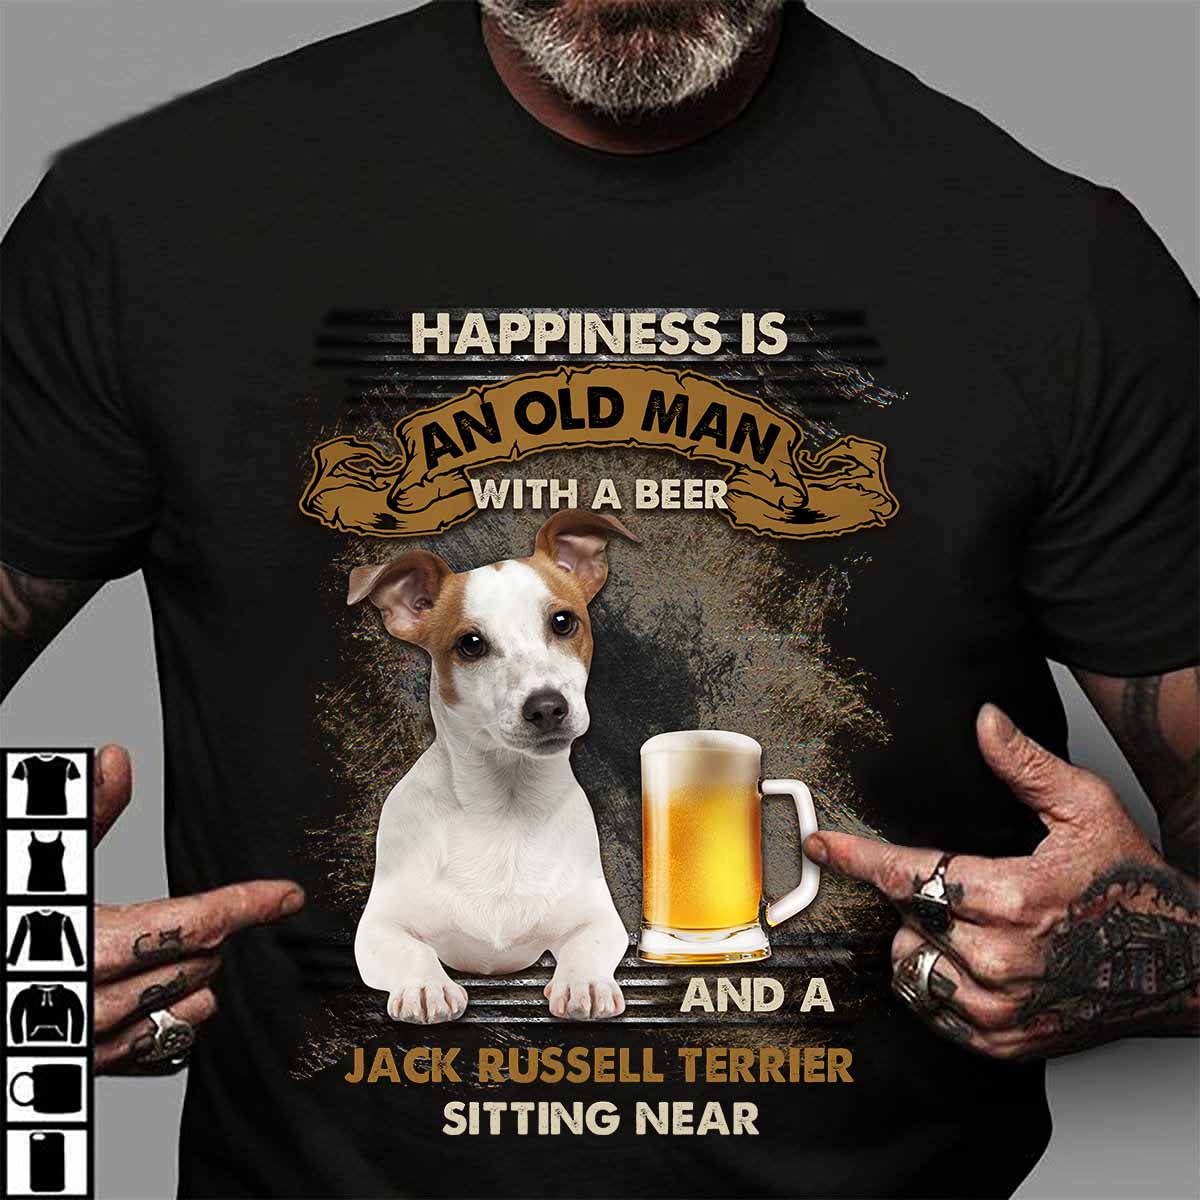 Happiness is an old man with a beer and a Jack Russell sitting near - Beer lover